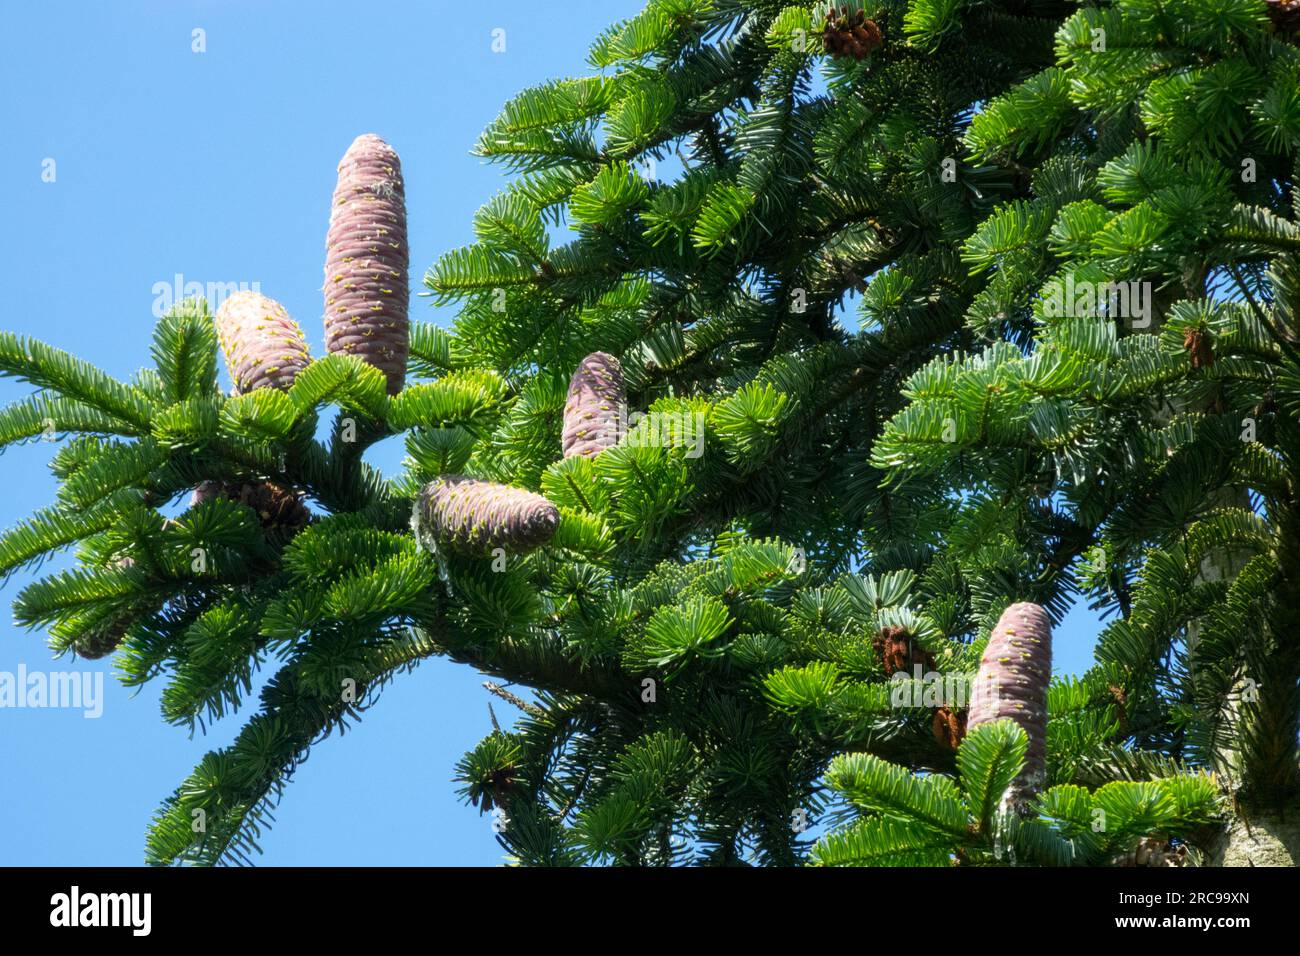 Greek Fir, Cones, Abies cephalonica Female cones on Conifer, Branch Stock Photo